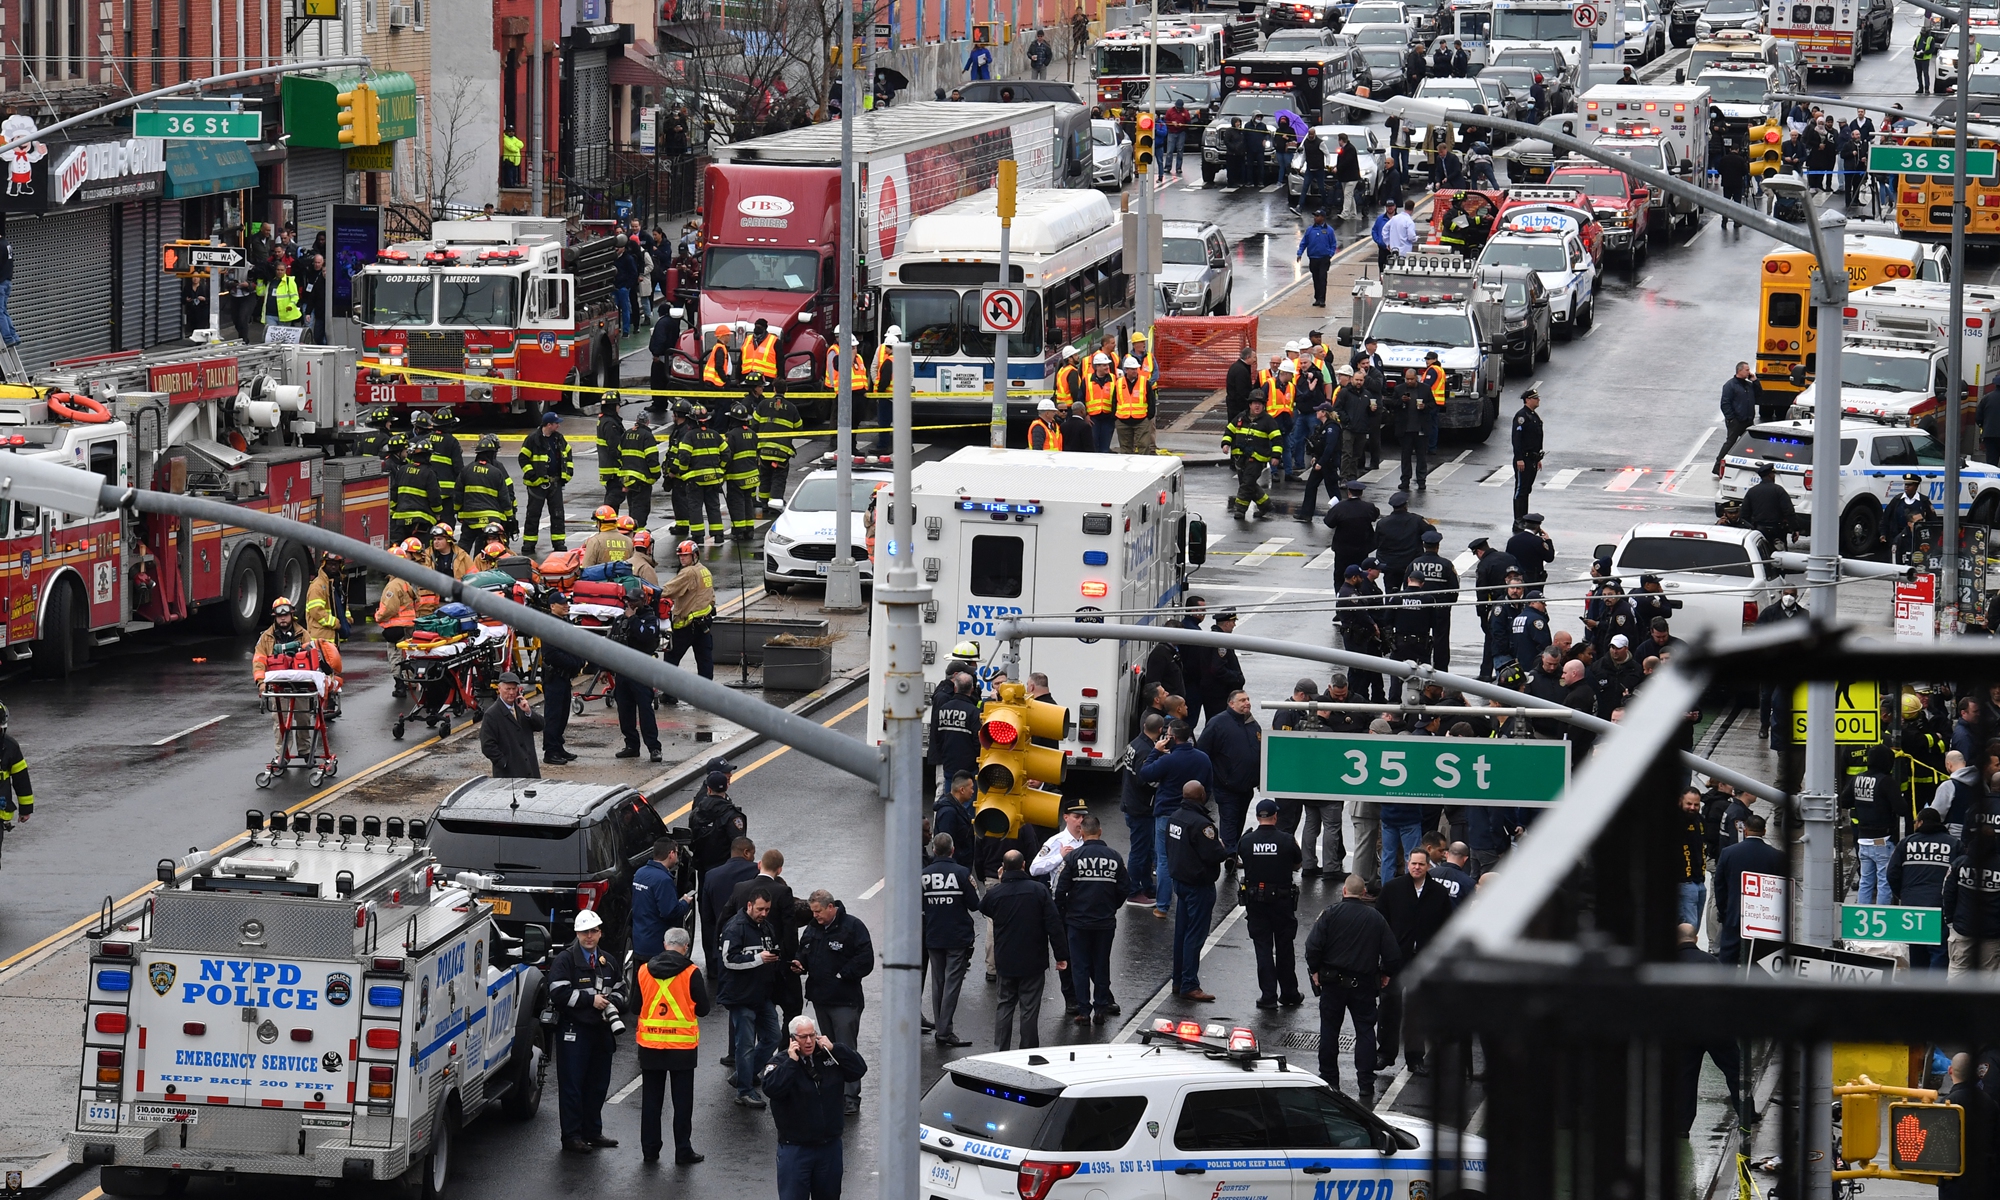 Members of the New York Police Department and emergency vehicles crowd the streets after at least 13 people were injured during a rush-hour shooting at a subway station in the New York borough of Brooklyn on April 12, 2022, where authorities said 